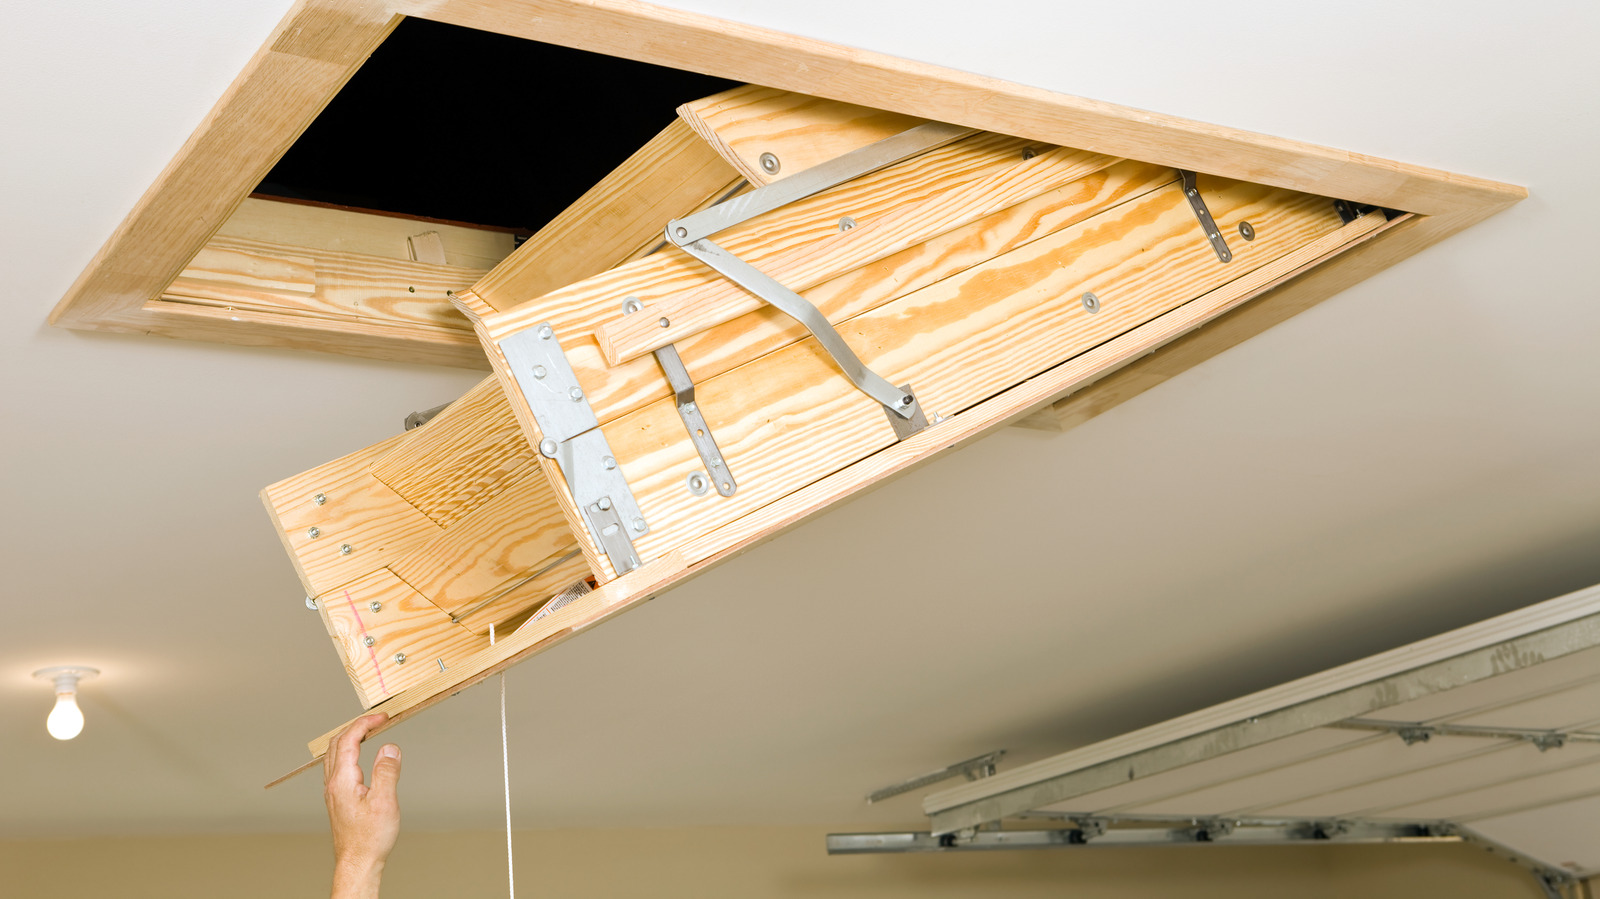 https://www.housedigest.com/img/gallery/the-simple-solution-to-get-rid-of-that-unsightly-attic-door-string/l-intro-1705968117.jpg